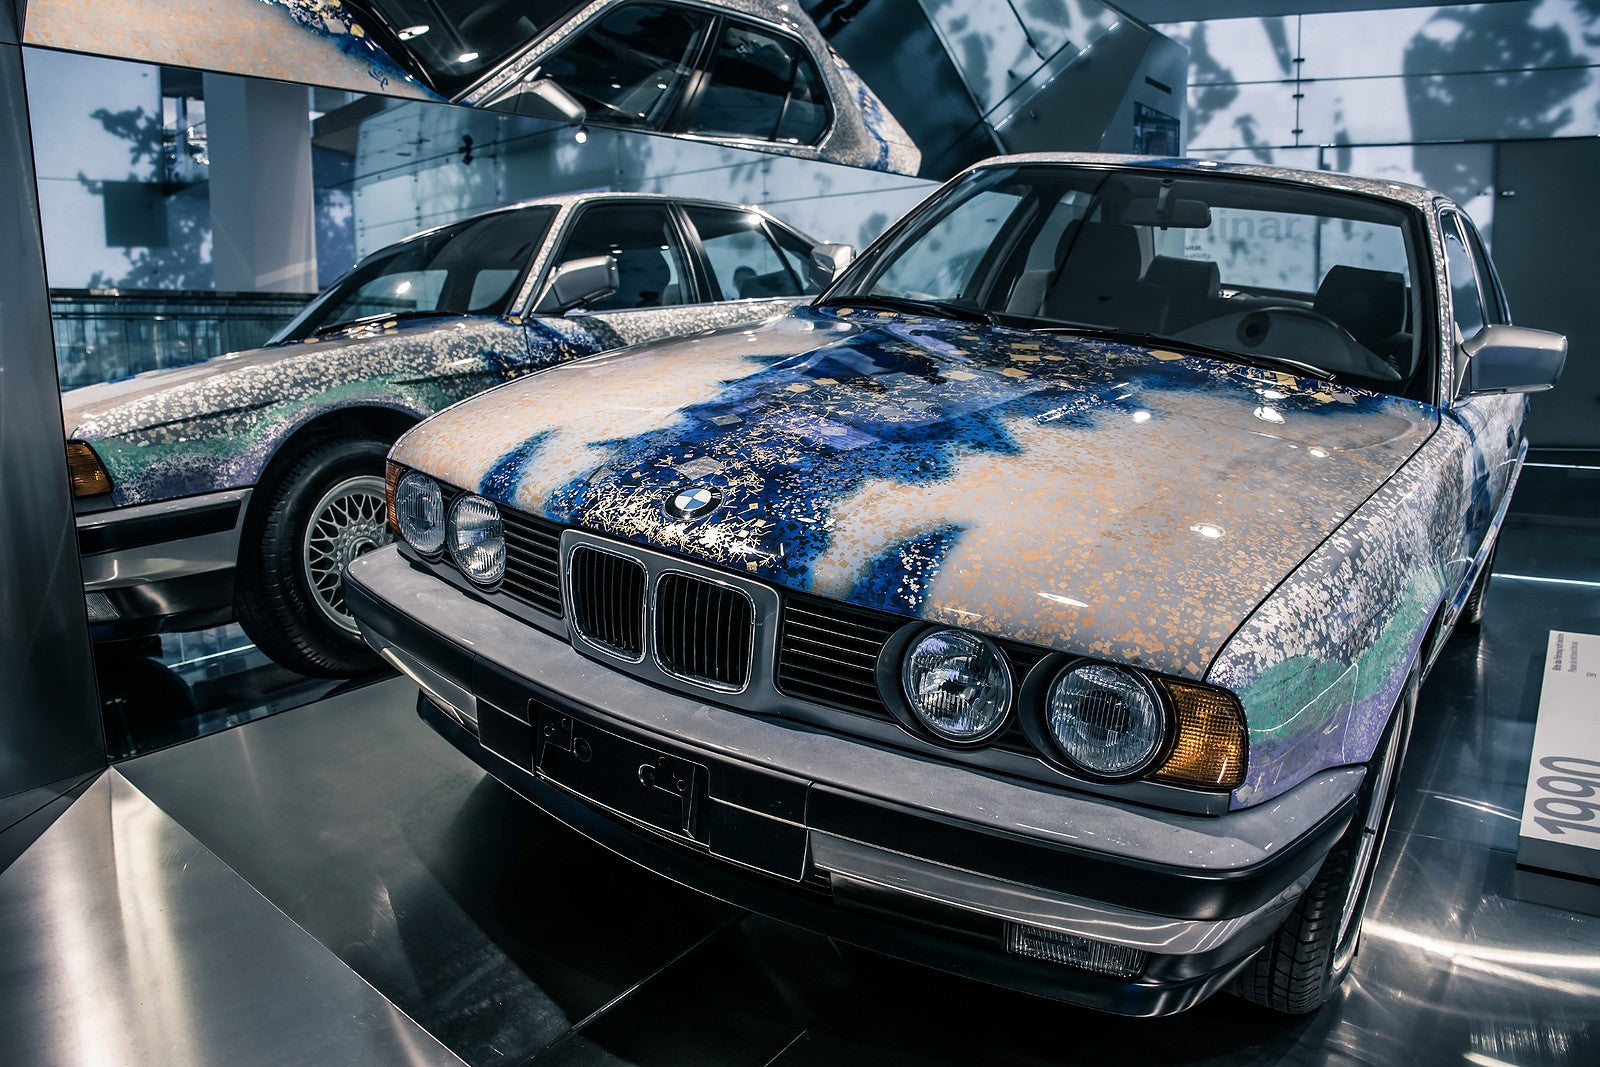 bmw-e34-5series-in-museum